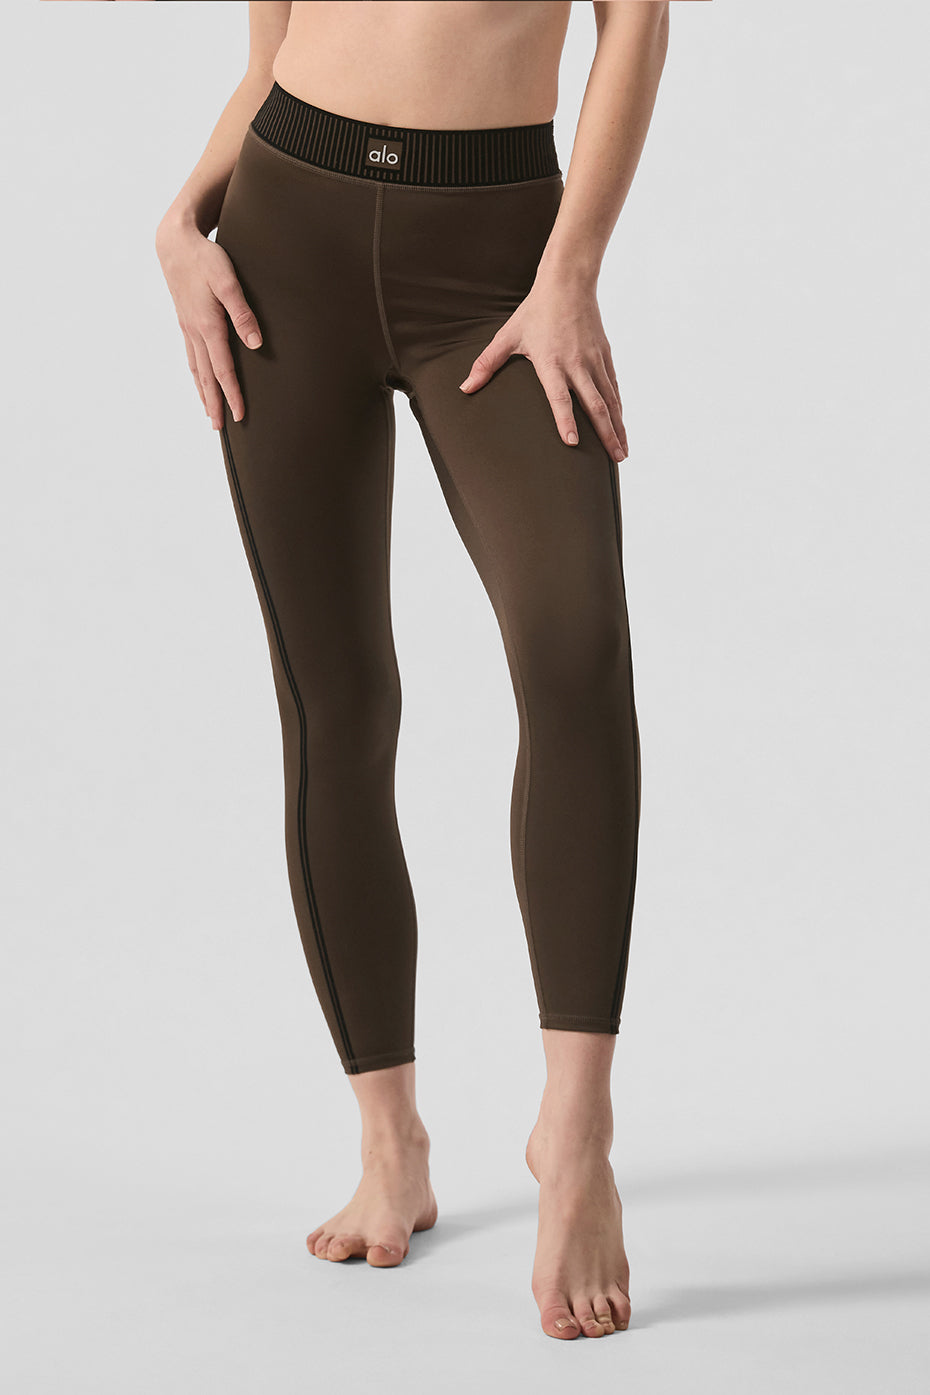 7/8 High-Waist Airlift Legging in Espresso by Alo Yoga